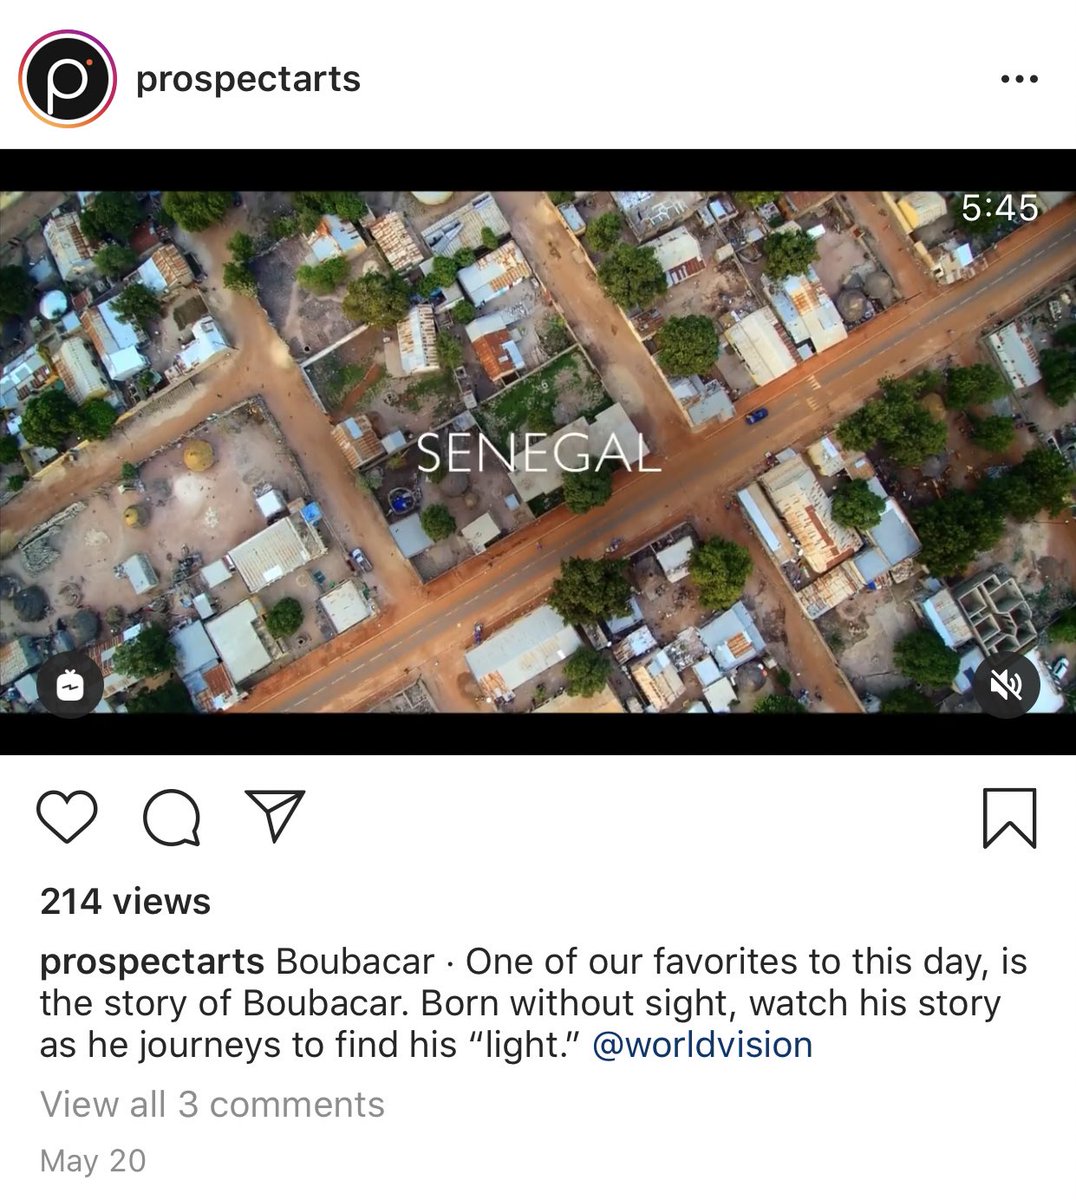 Prospect Arts’ work with clients WorldVision (MM did a spot with them in 2016) and Nat Geo (partnered with Hazza) go way back. Plus, they seem to hang around places like Cannes and Hollywood and London. Hmm...